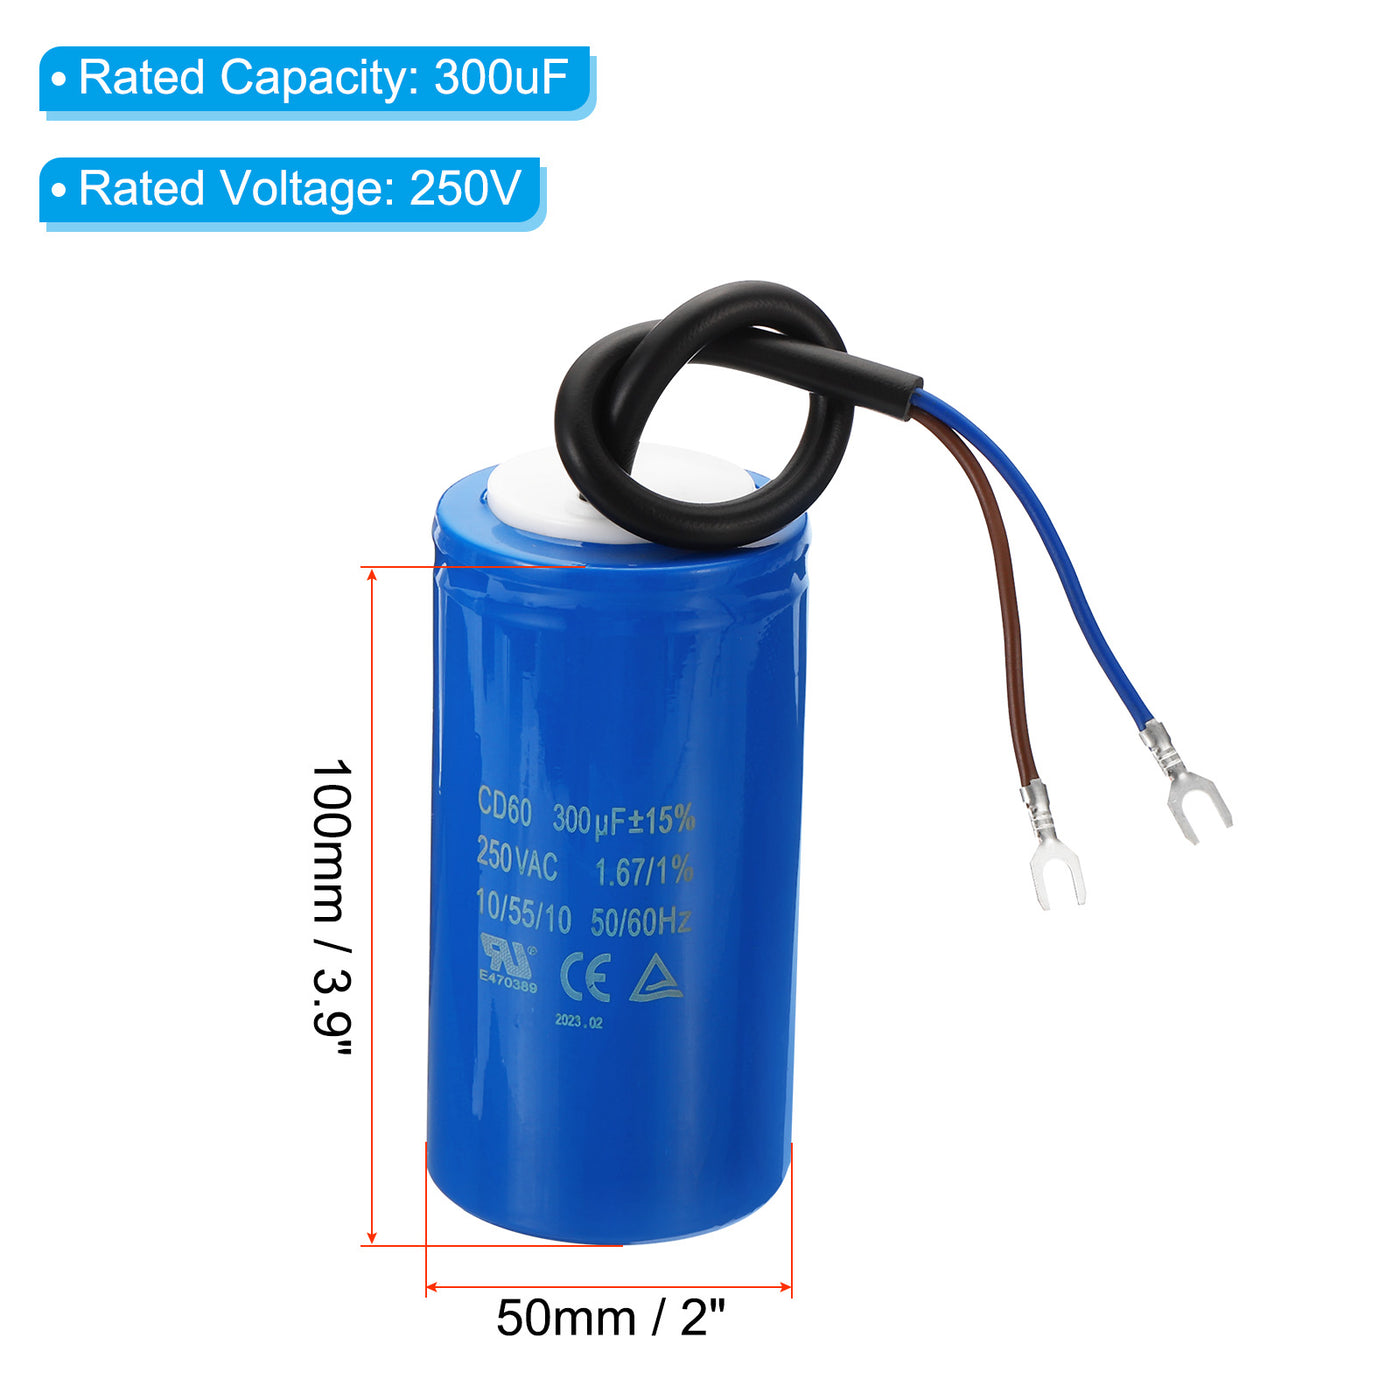 Harfington CD60 Run Capacitor, 2 Pack 300uF 250VAC 50/60Hz Motor Starting Capacitor with 2 Wires for Air Compressor Motor Starts Running